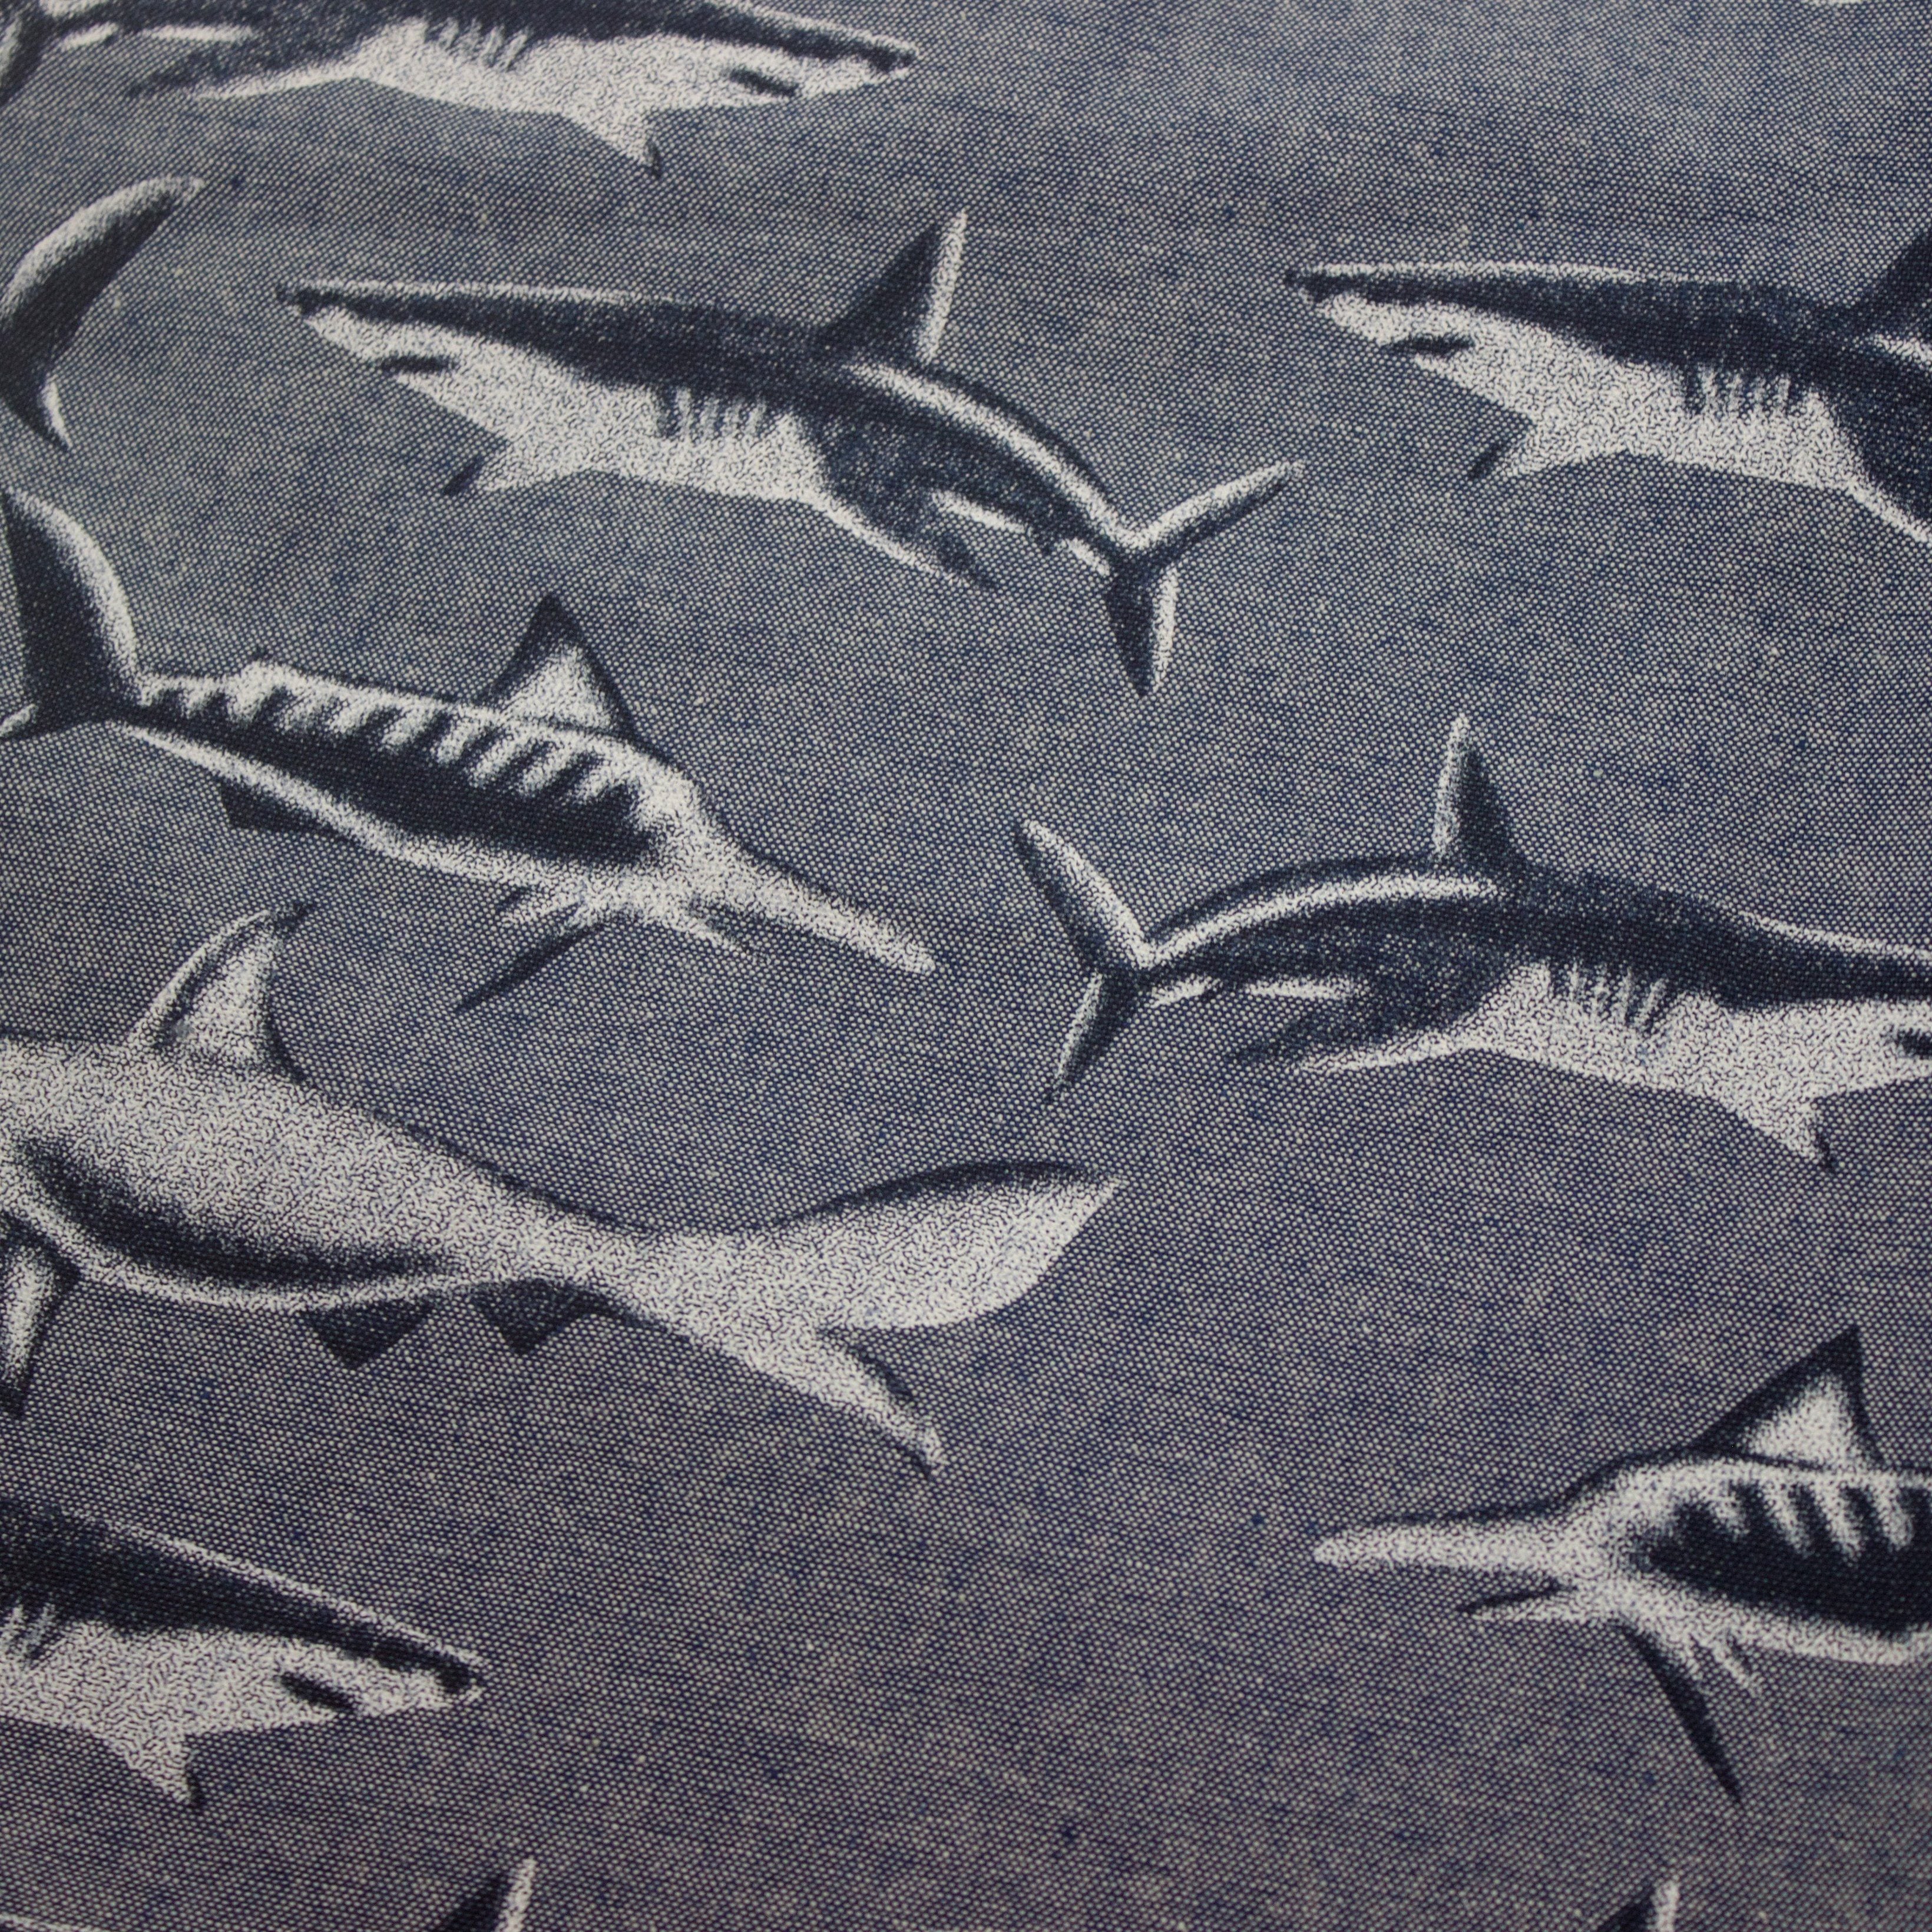 Shark Graphic Print Fabric Flat Front Shorts for Men in Navy Blue